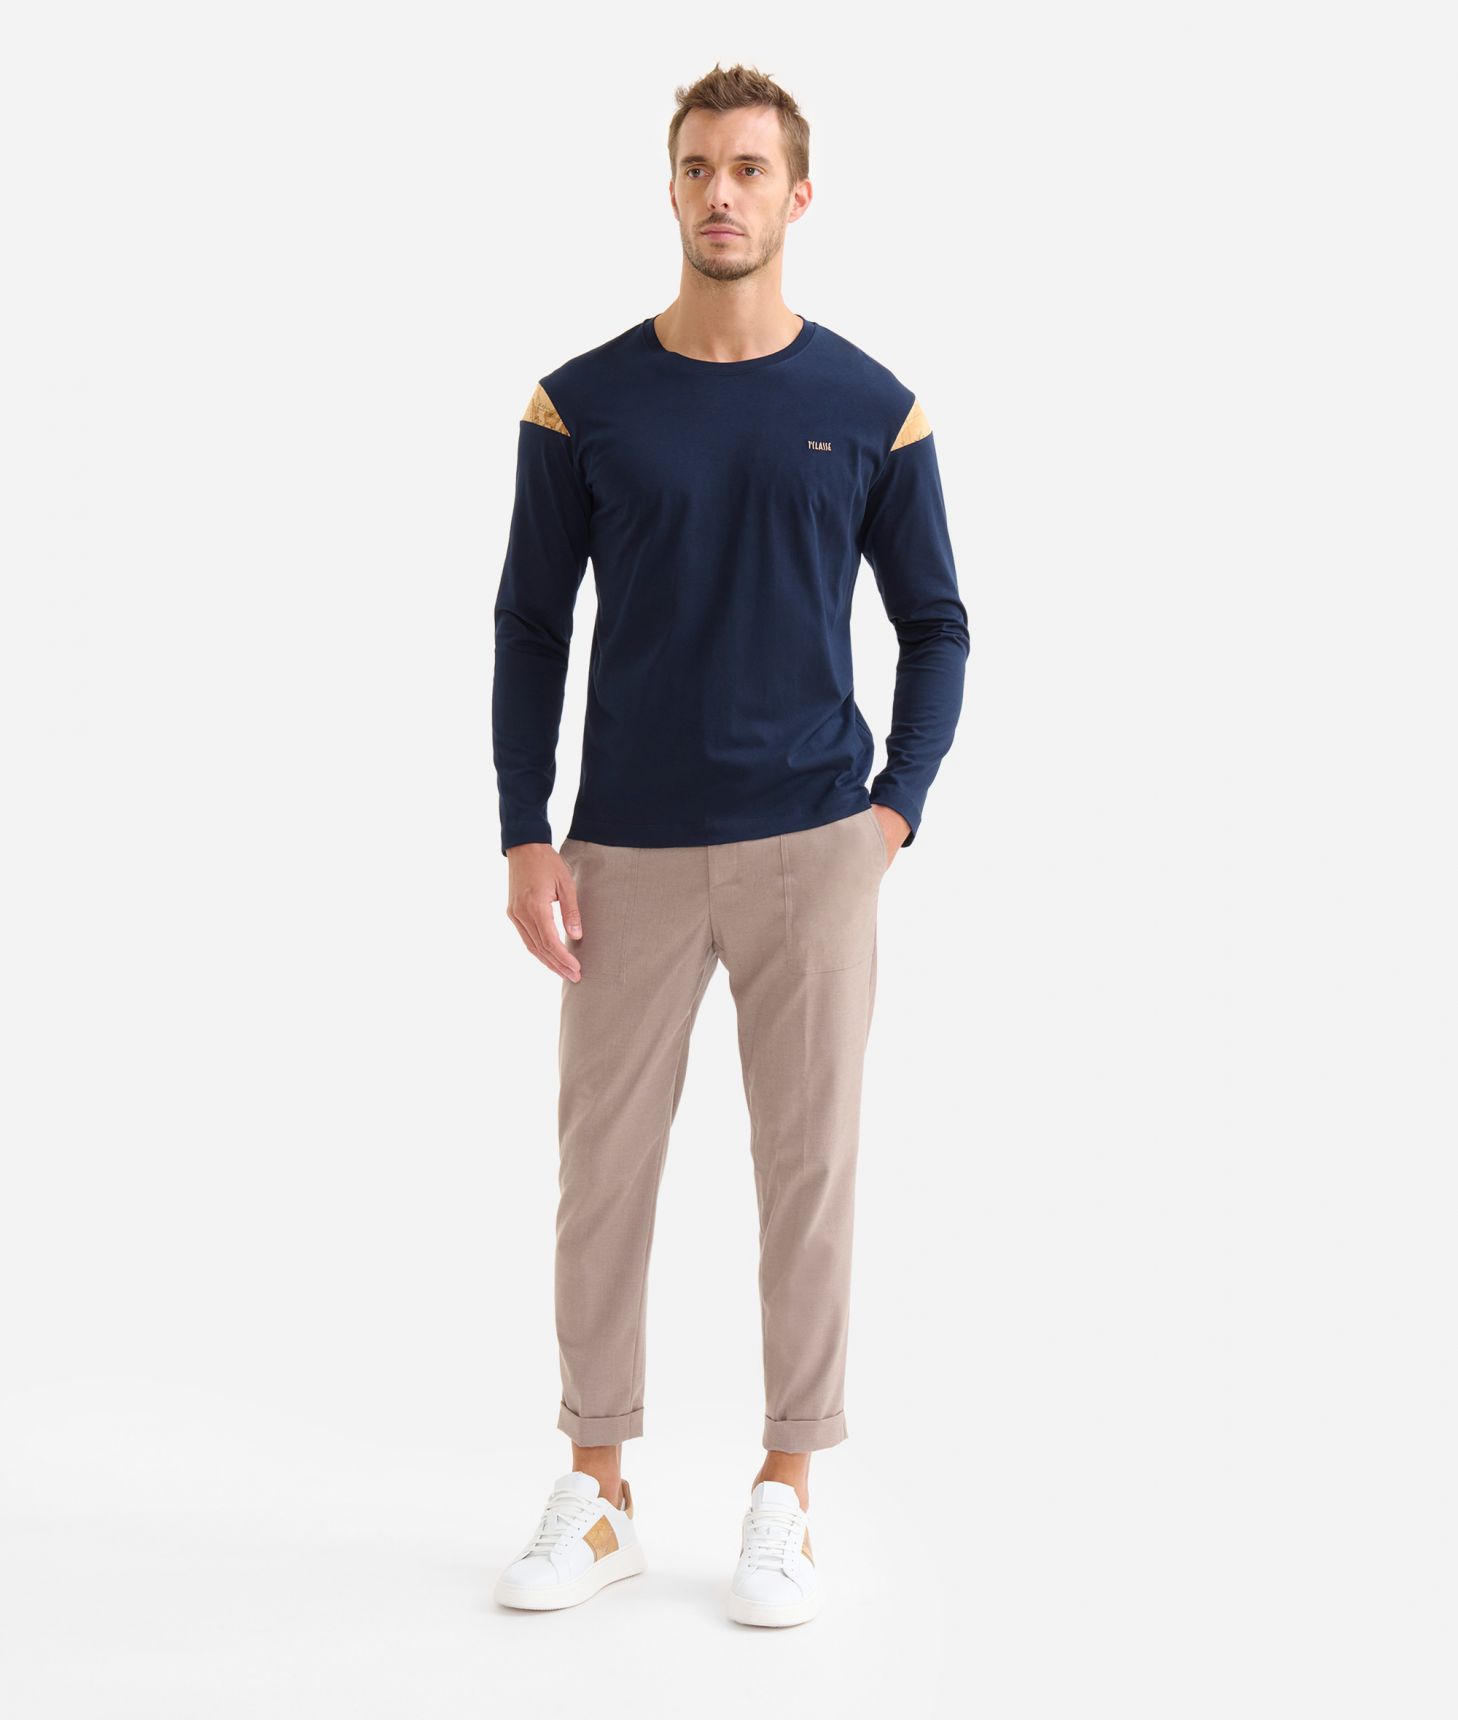 Long-sleeved cotton t-shirt Navy Blue,front